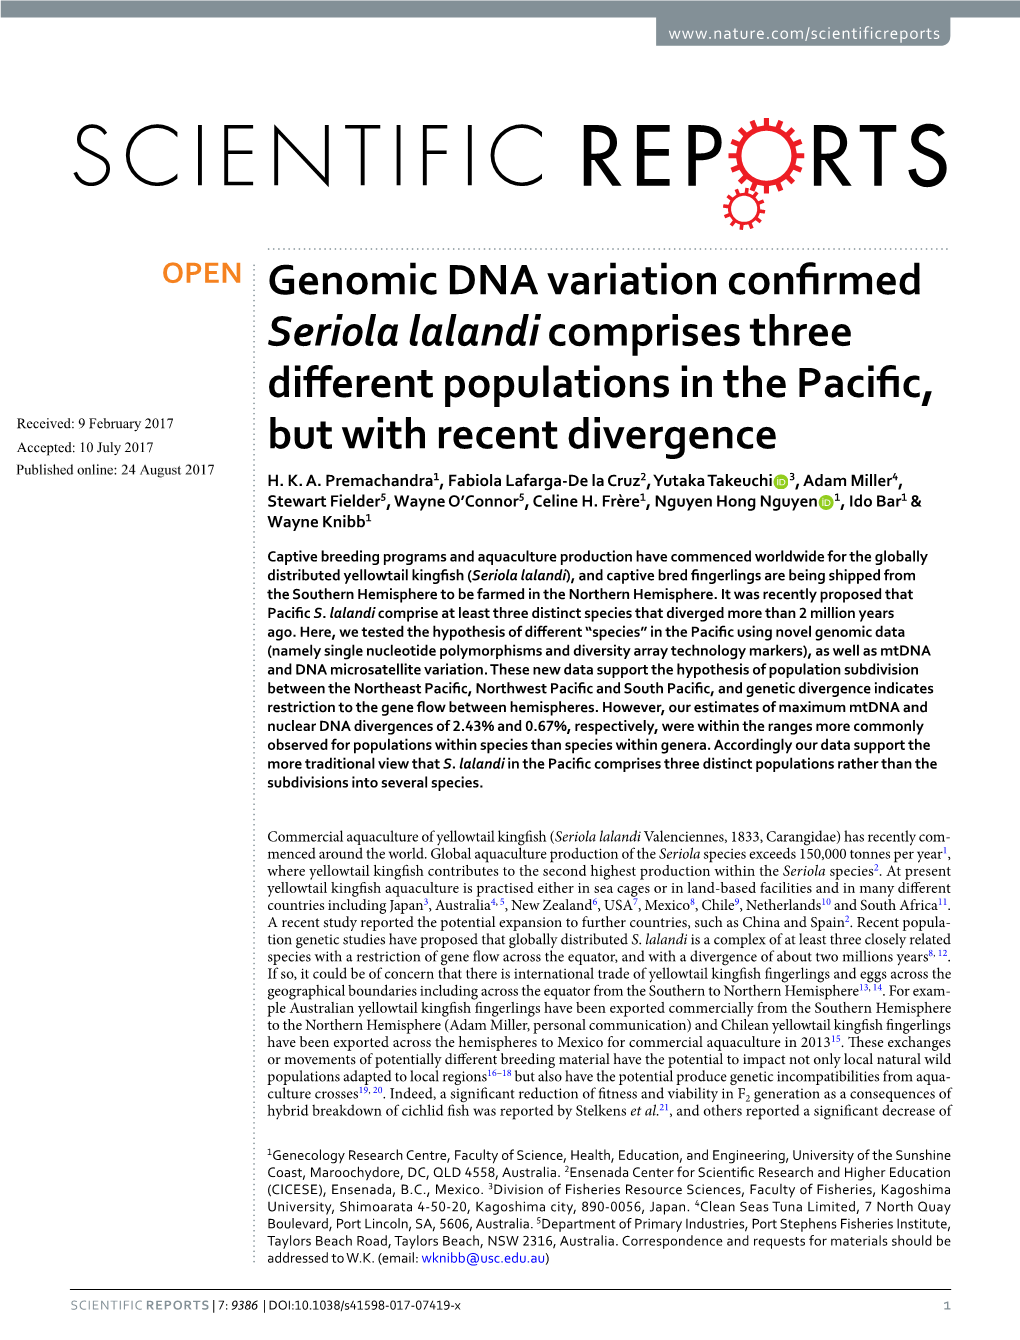 Genomic DNA Variation Confirmed Seriola Lalandi Comprises Three Different Populations in the Pacific, but with Recent Divergence